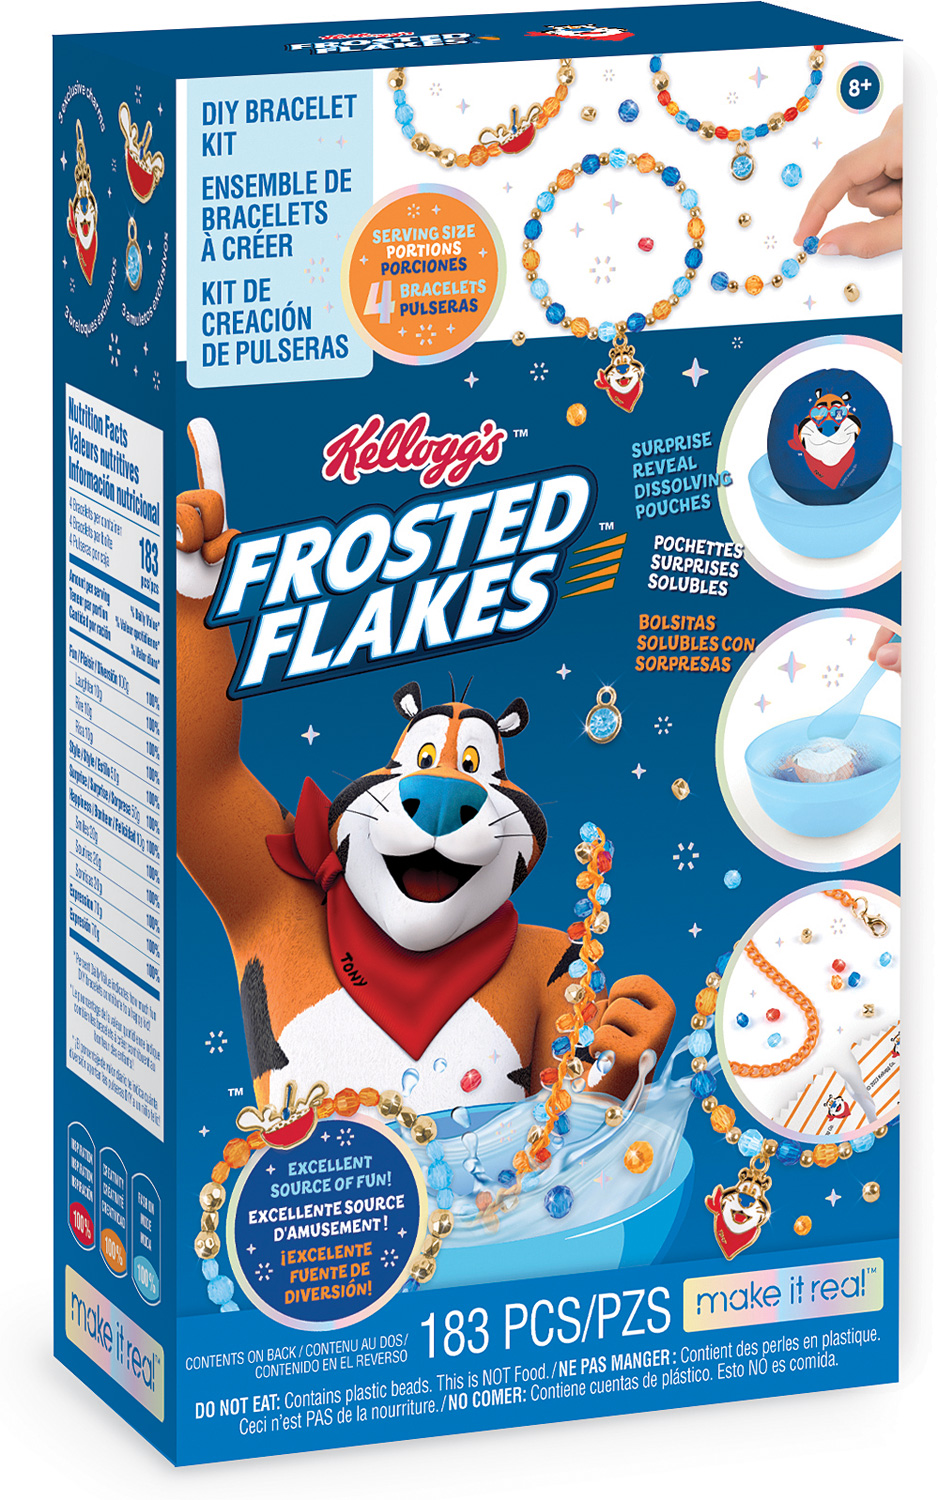 Cereal-sly Cute Kellogg's Frosted Flakes DIY Bracelet Kit - The